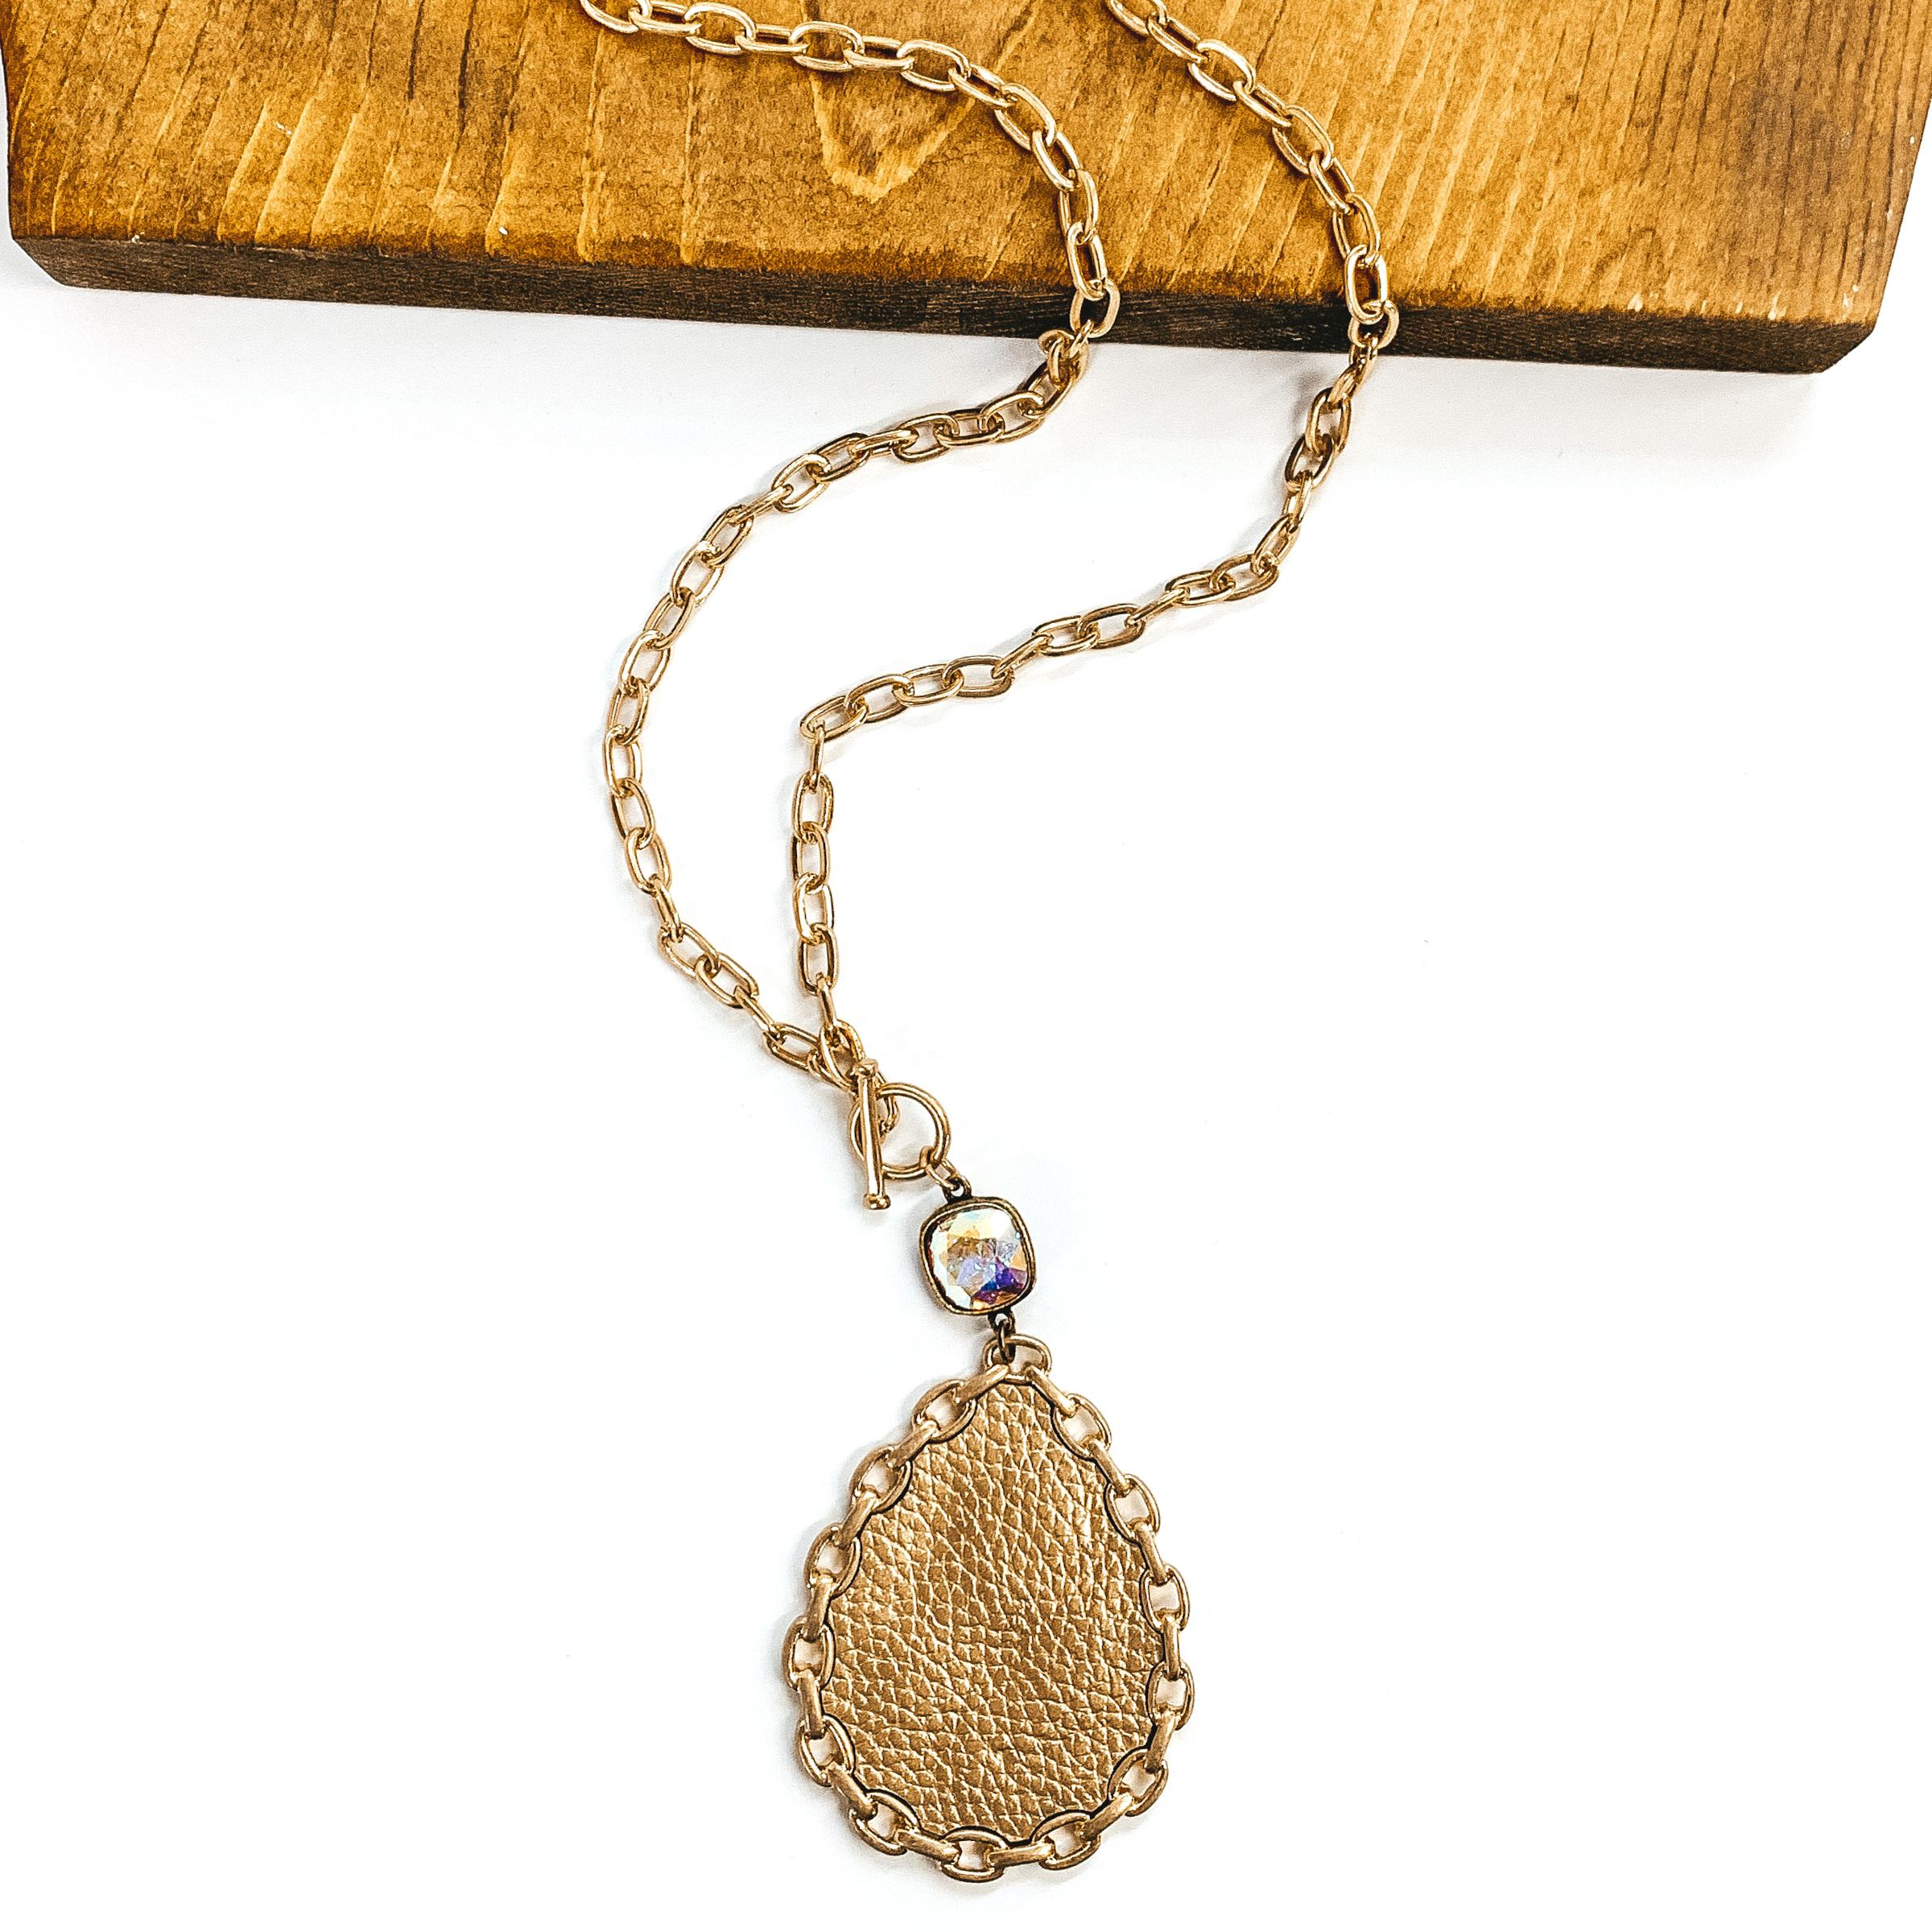 Gold chained necklace with front toggle clasp. This necklace includes a hanging AB cushion cut crystal with a bronze back, hanging from the toggle clasp. Hanging from the crystal was a teardrop pendant in gold with a gold chained outline. This necklace is pictured partially on a piece of dark wood and on a white background.